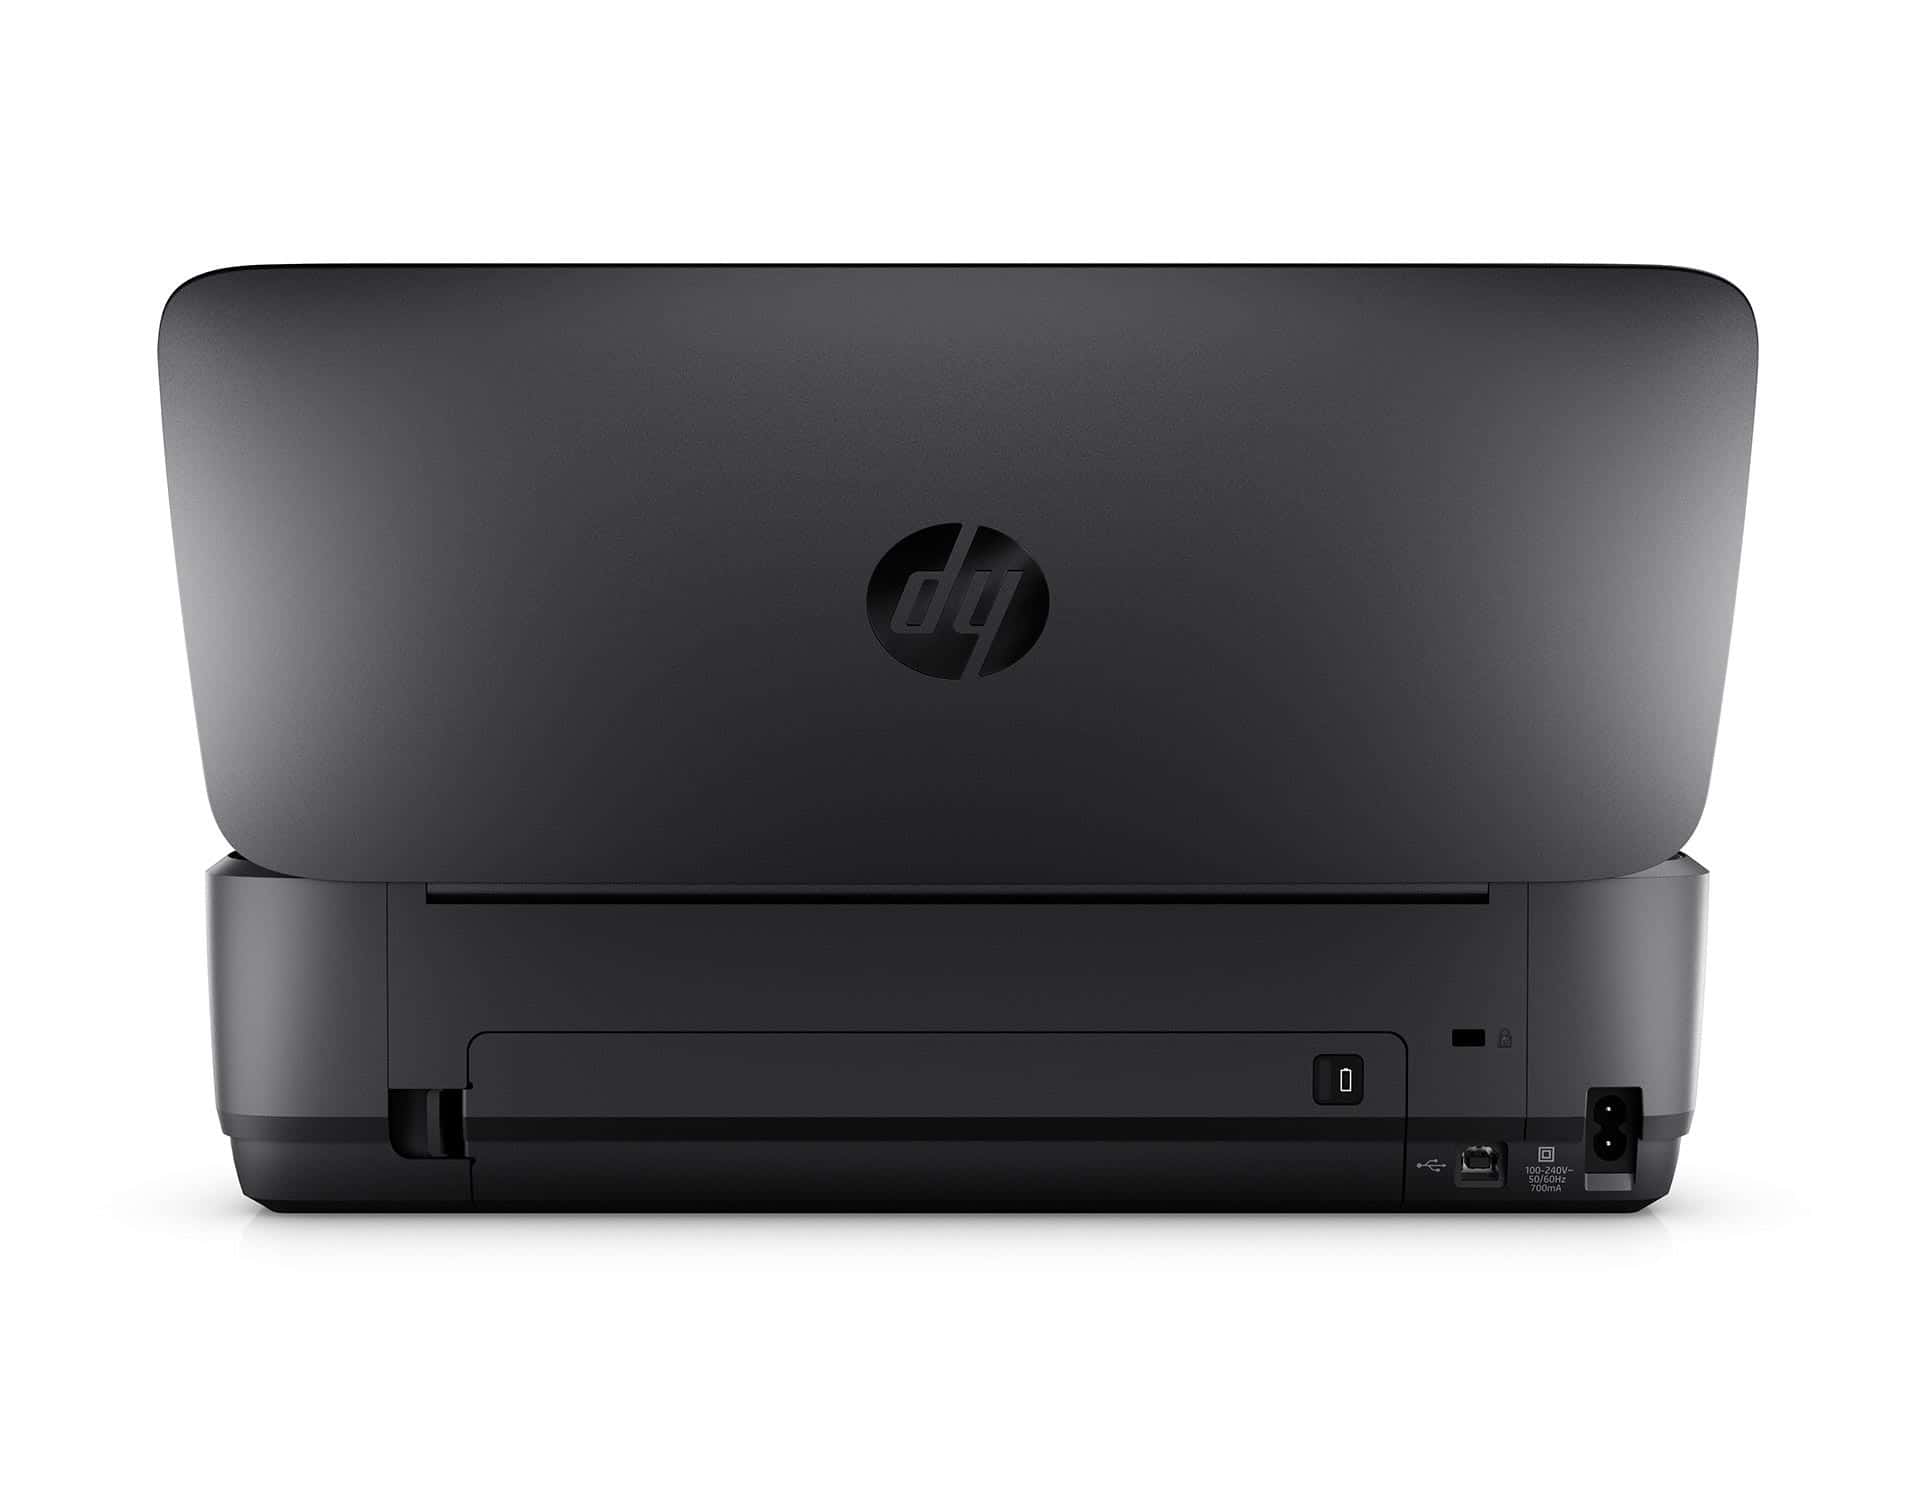 HP OfficeJet 250 Mobile AiO（CZ992A#ABJ）プリンター製品詳細